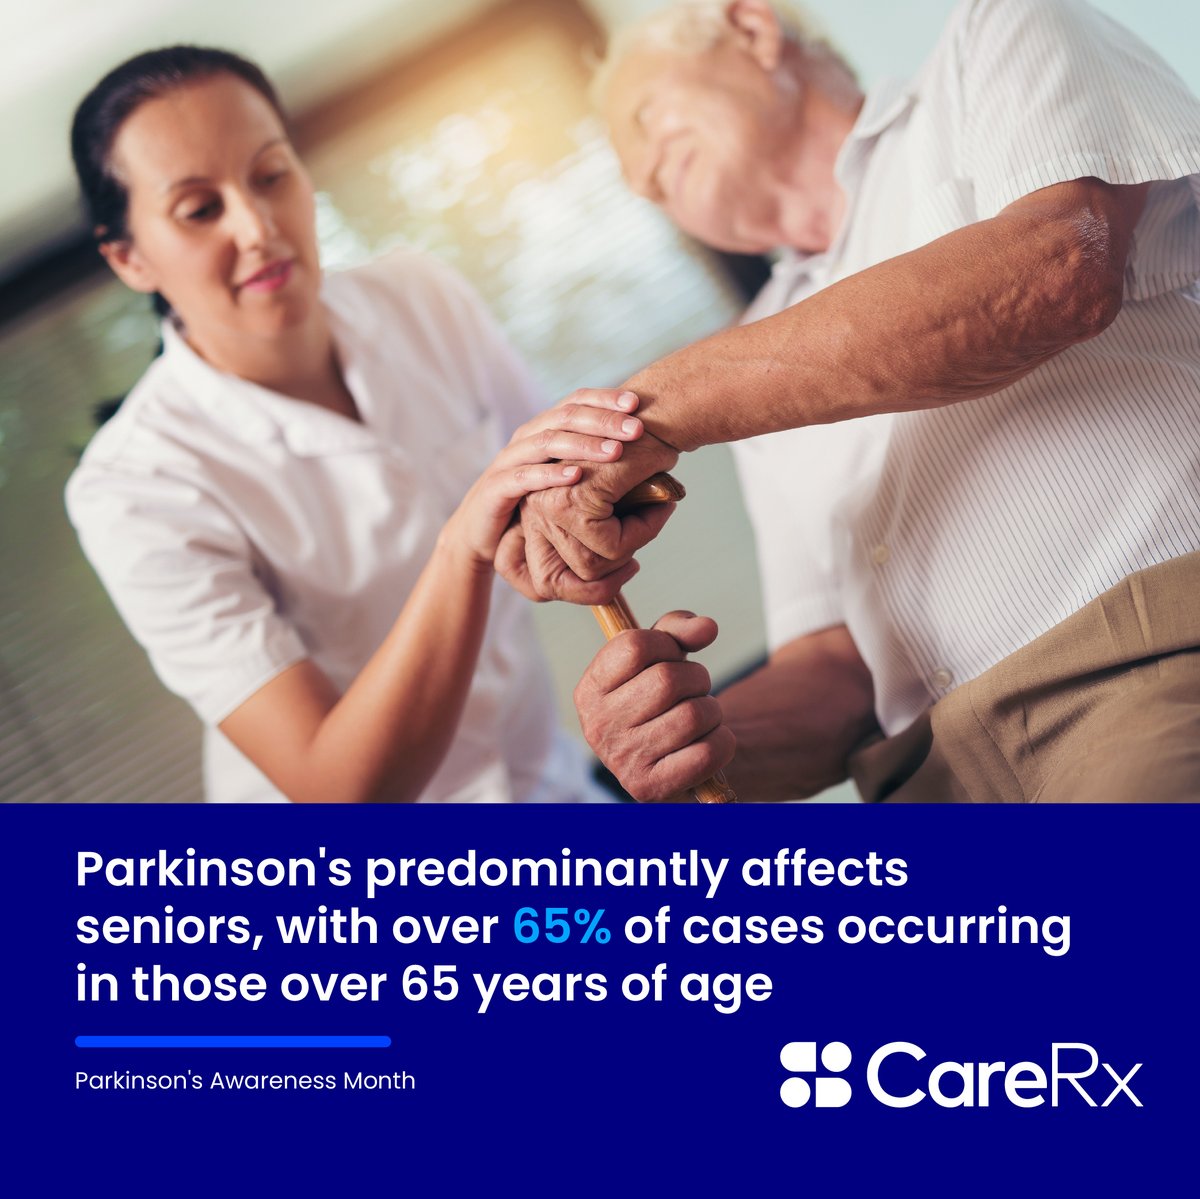 Did you know Parkinson's predominantly affects seniors, with over 65% of cases occurring in those over 65? CareRx provides educational support to manage seniors with Parkinson's disease and falls prevention. To find out more, visit: carerx.ca #ParkinsonAwareness